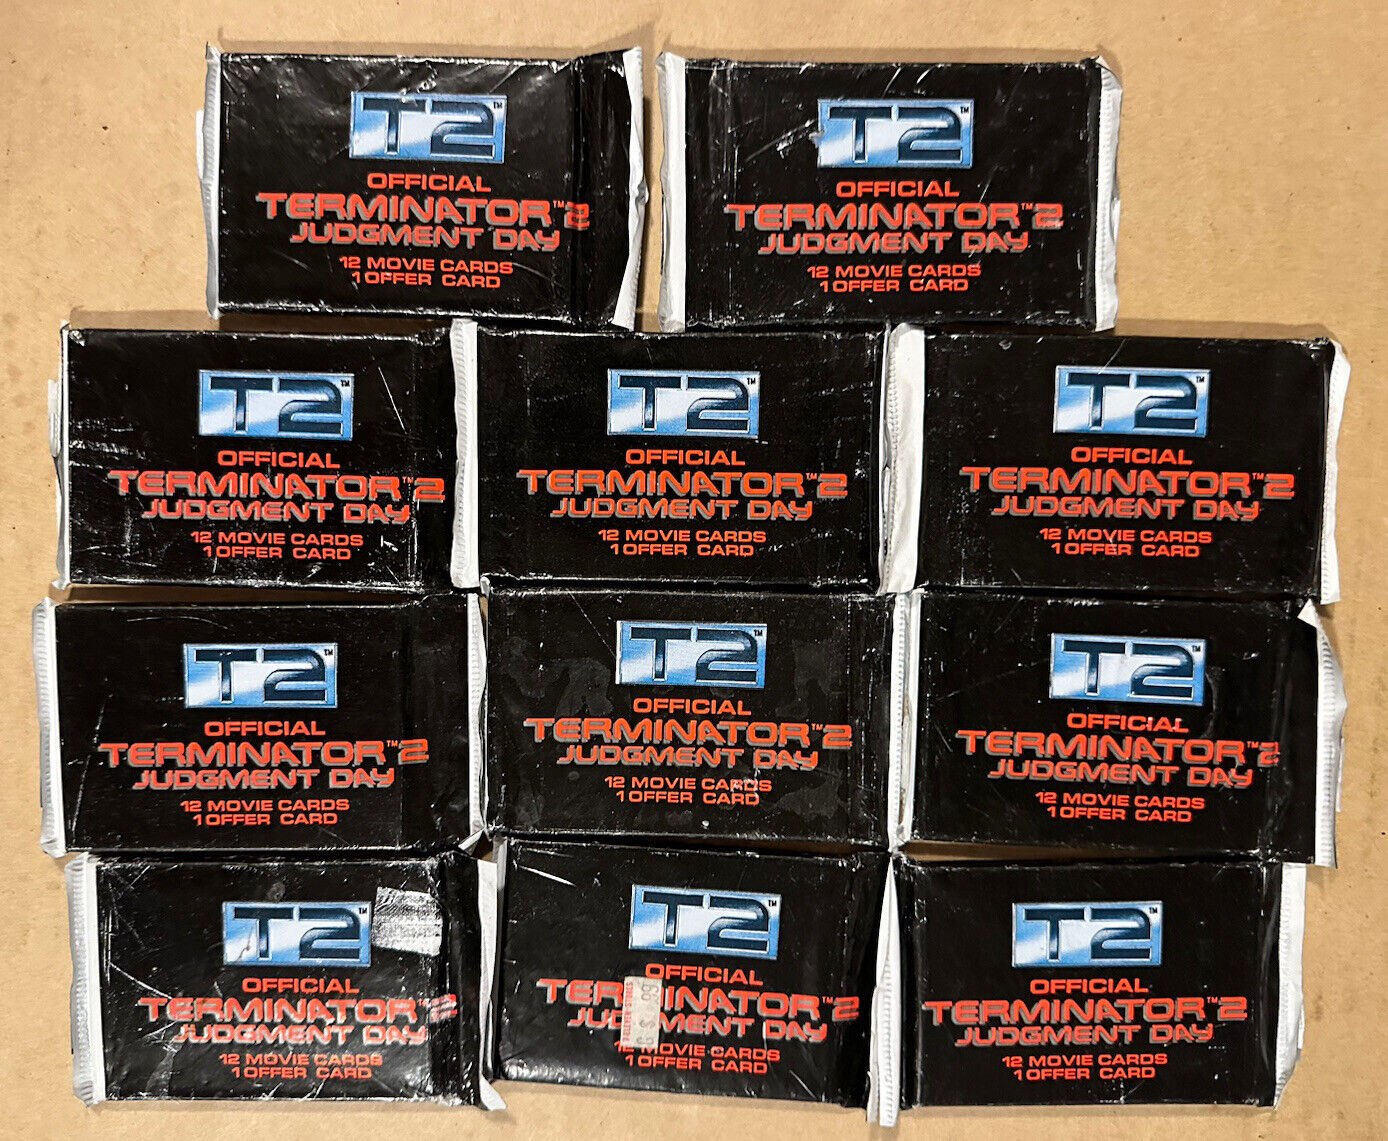 T2 Official Terminator 2 Judgement Day Movie Cards 11 Packs (all Factory Sealed)